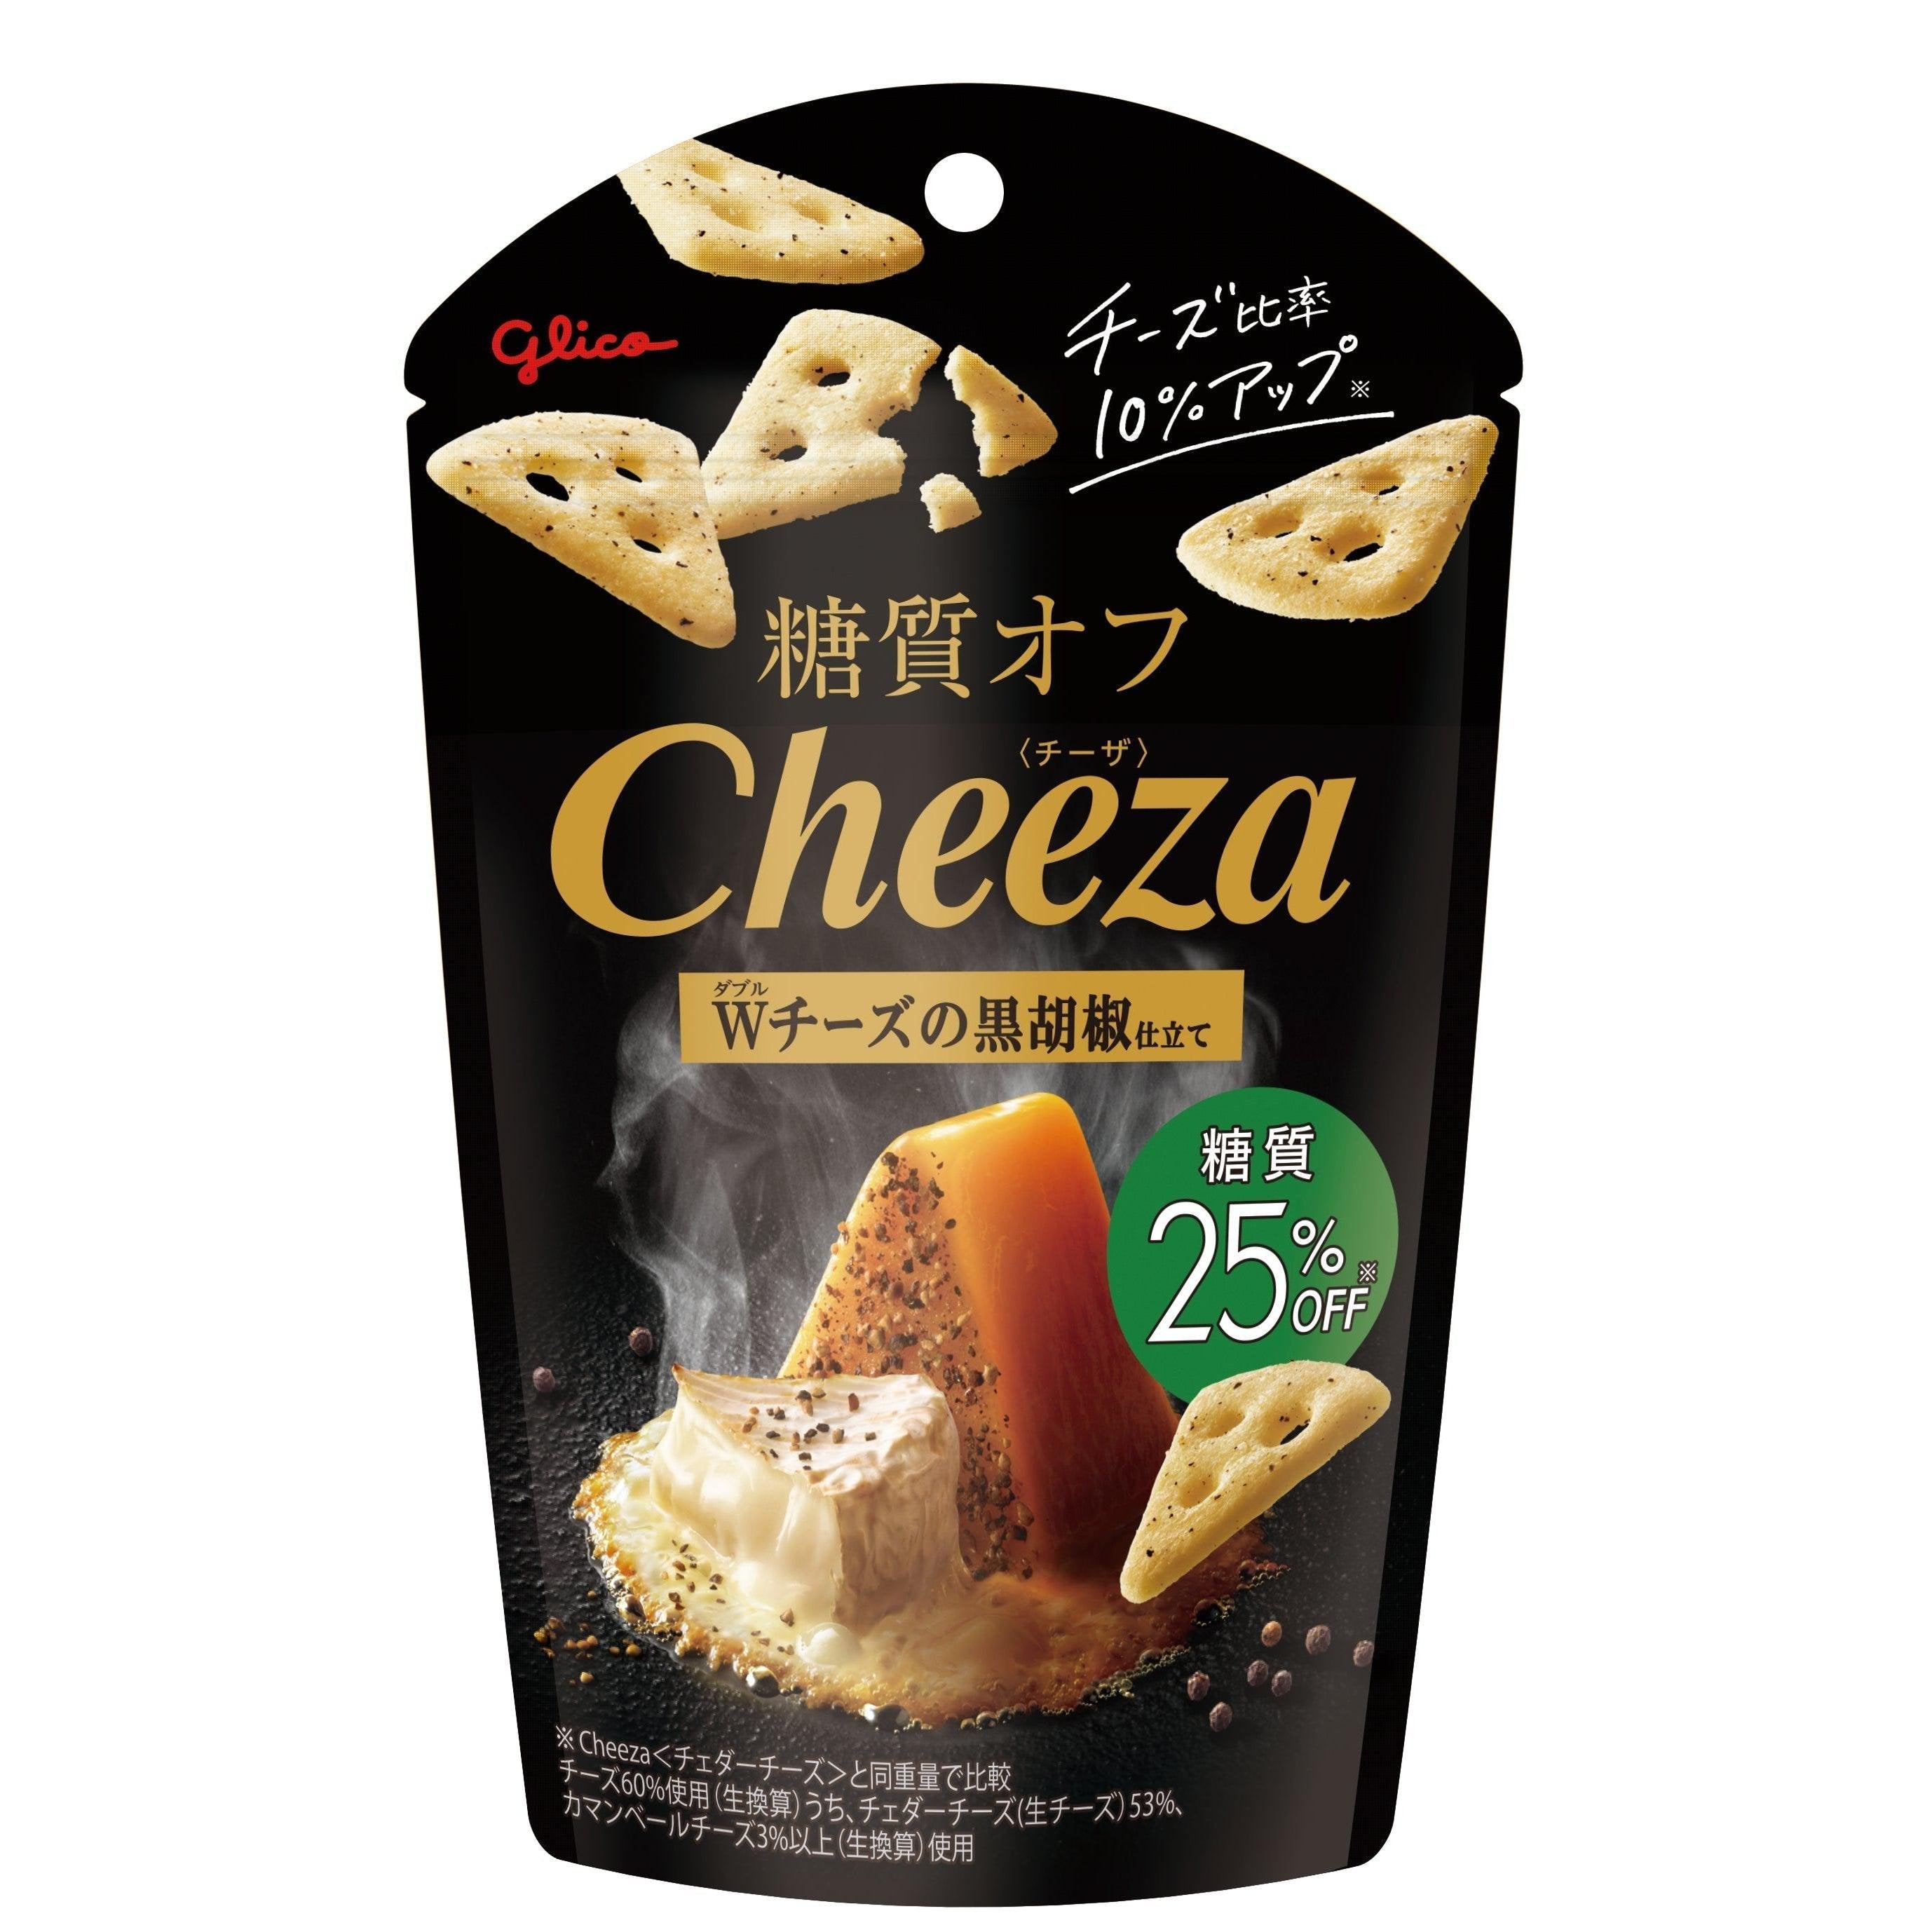 Glico Cheeza Low Carb Black Pepper Double Cheese Crackers 36g